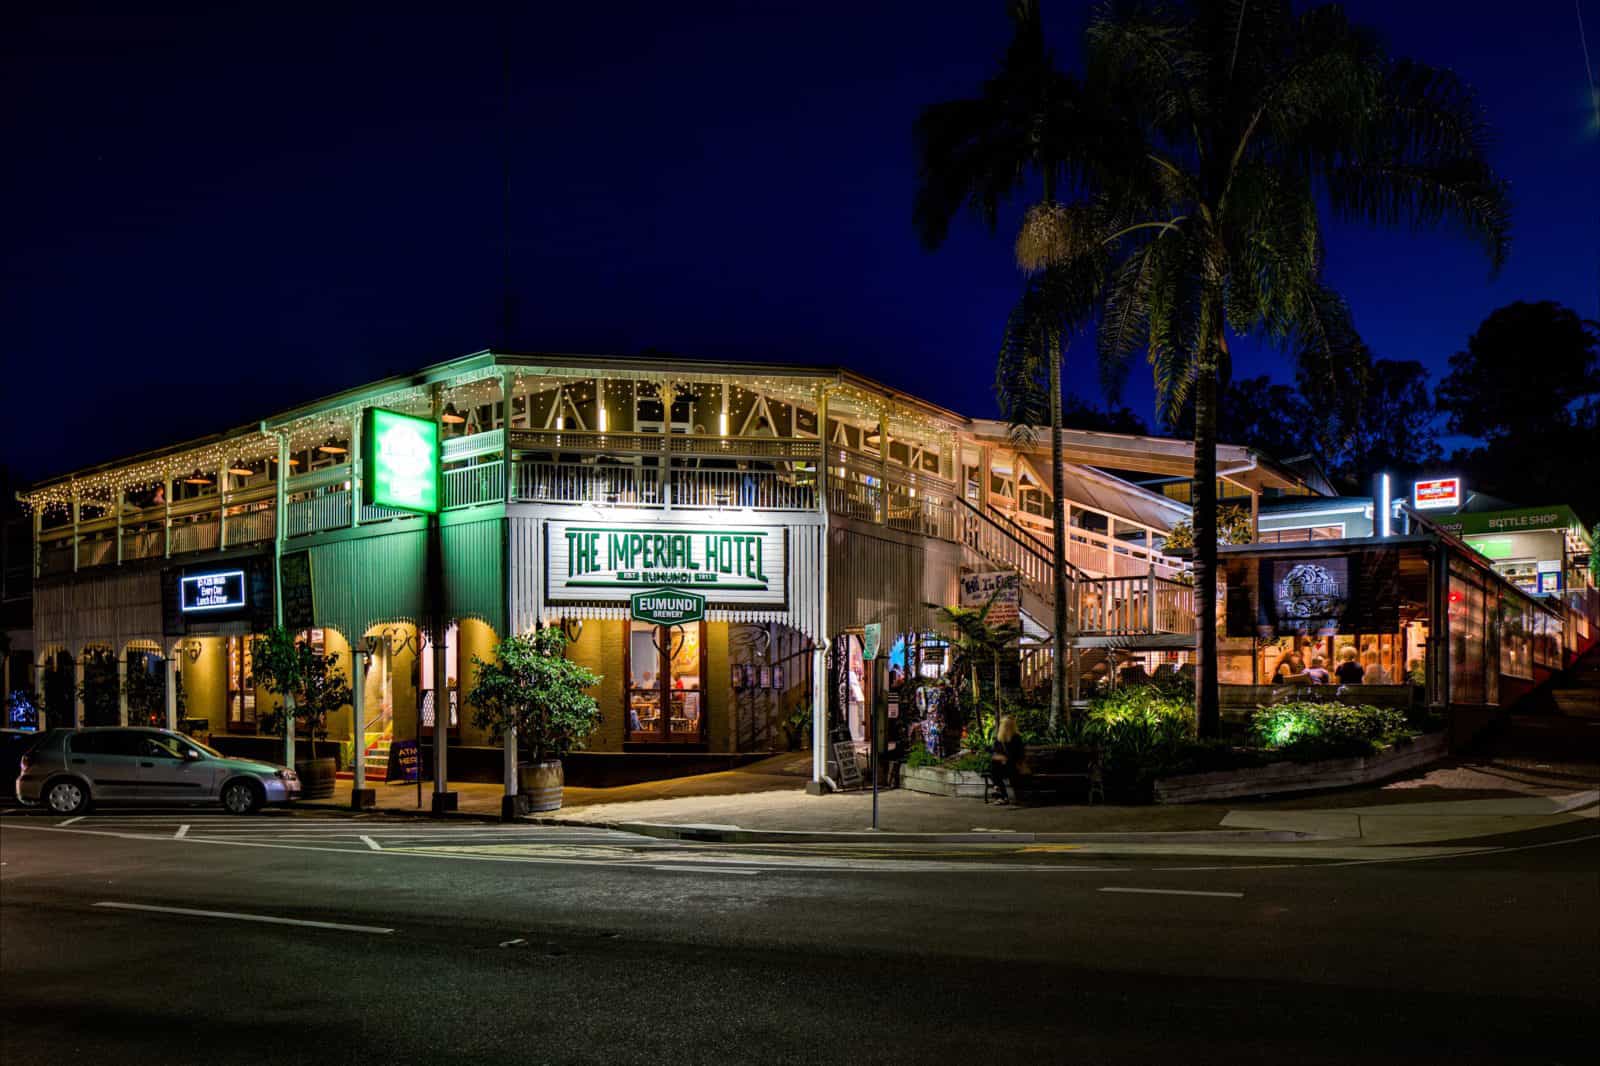 The Imperial Hotel and Eumundi Brewery